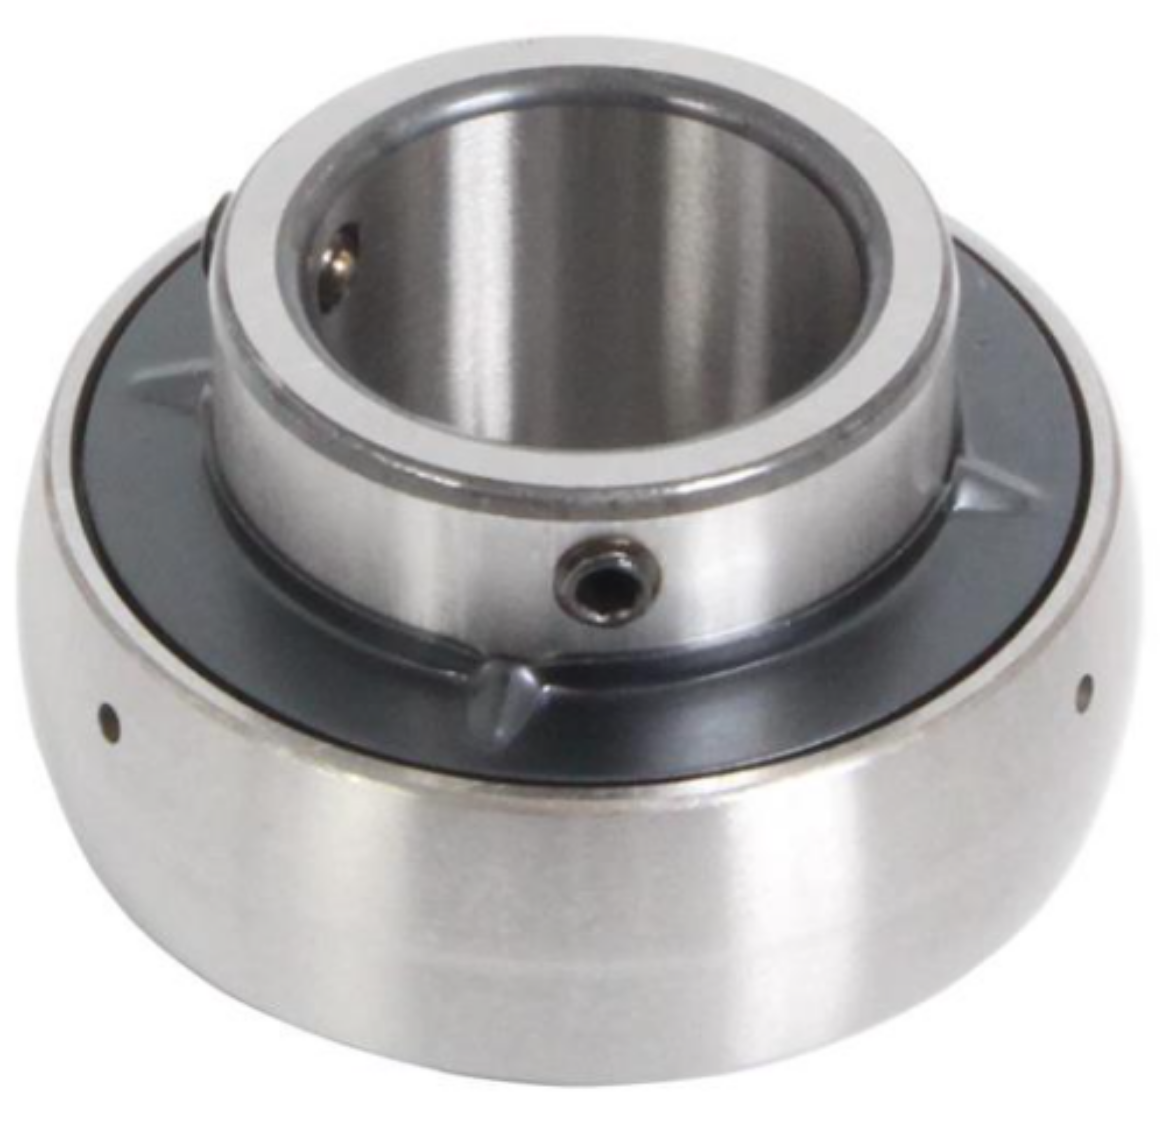 Picture of WIDE INNER RING BEARING 2-3/8"ID X 110mmOD x 65.1mmW (UC212-38)